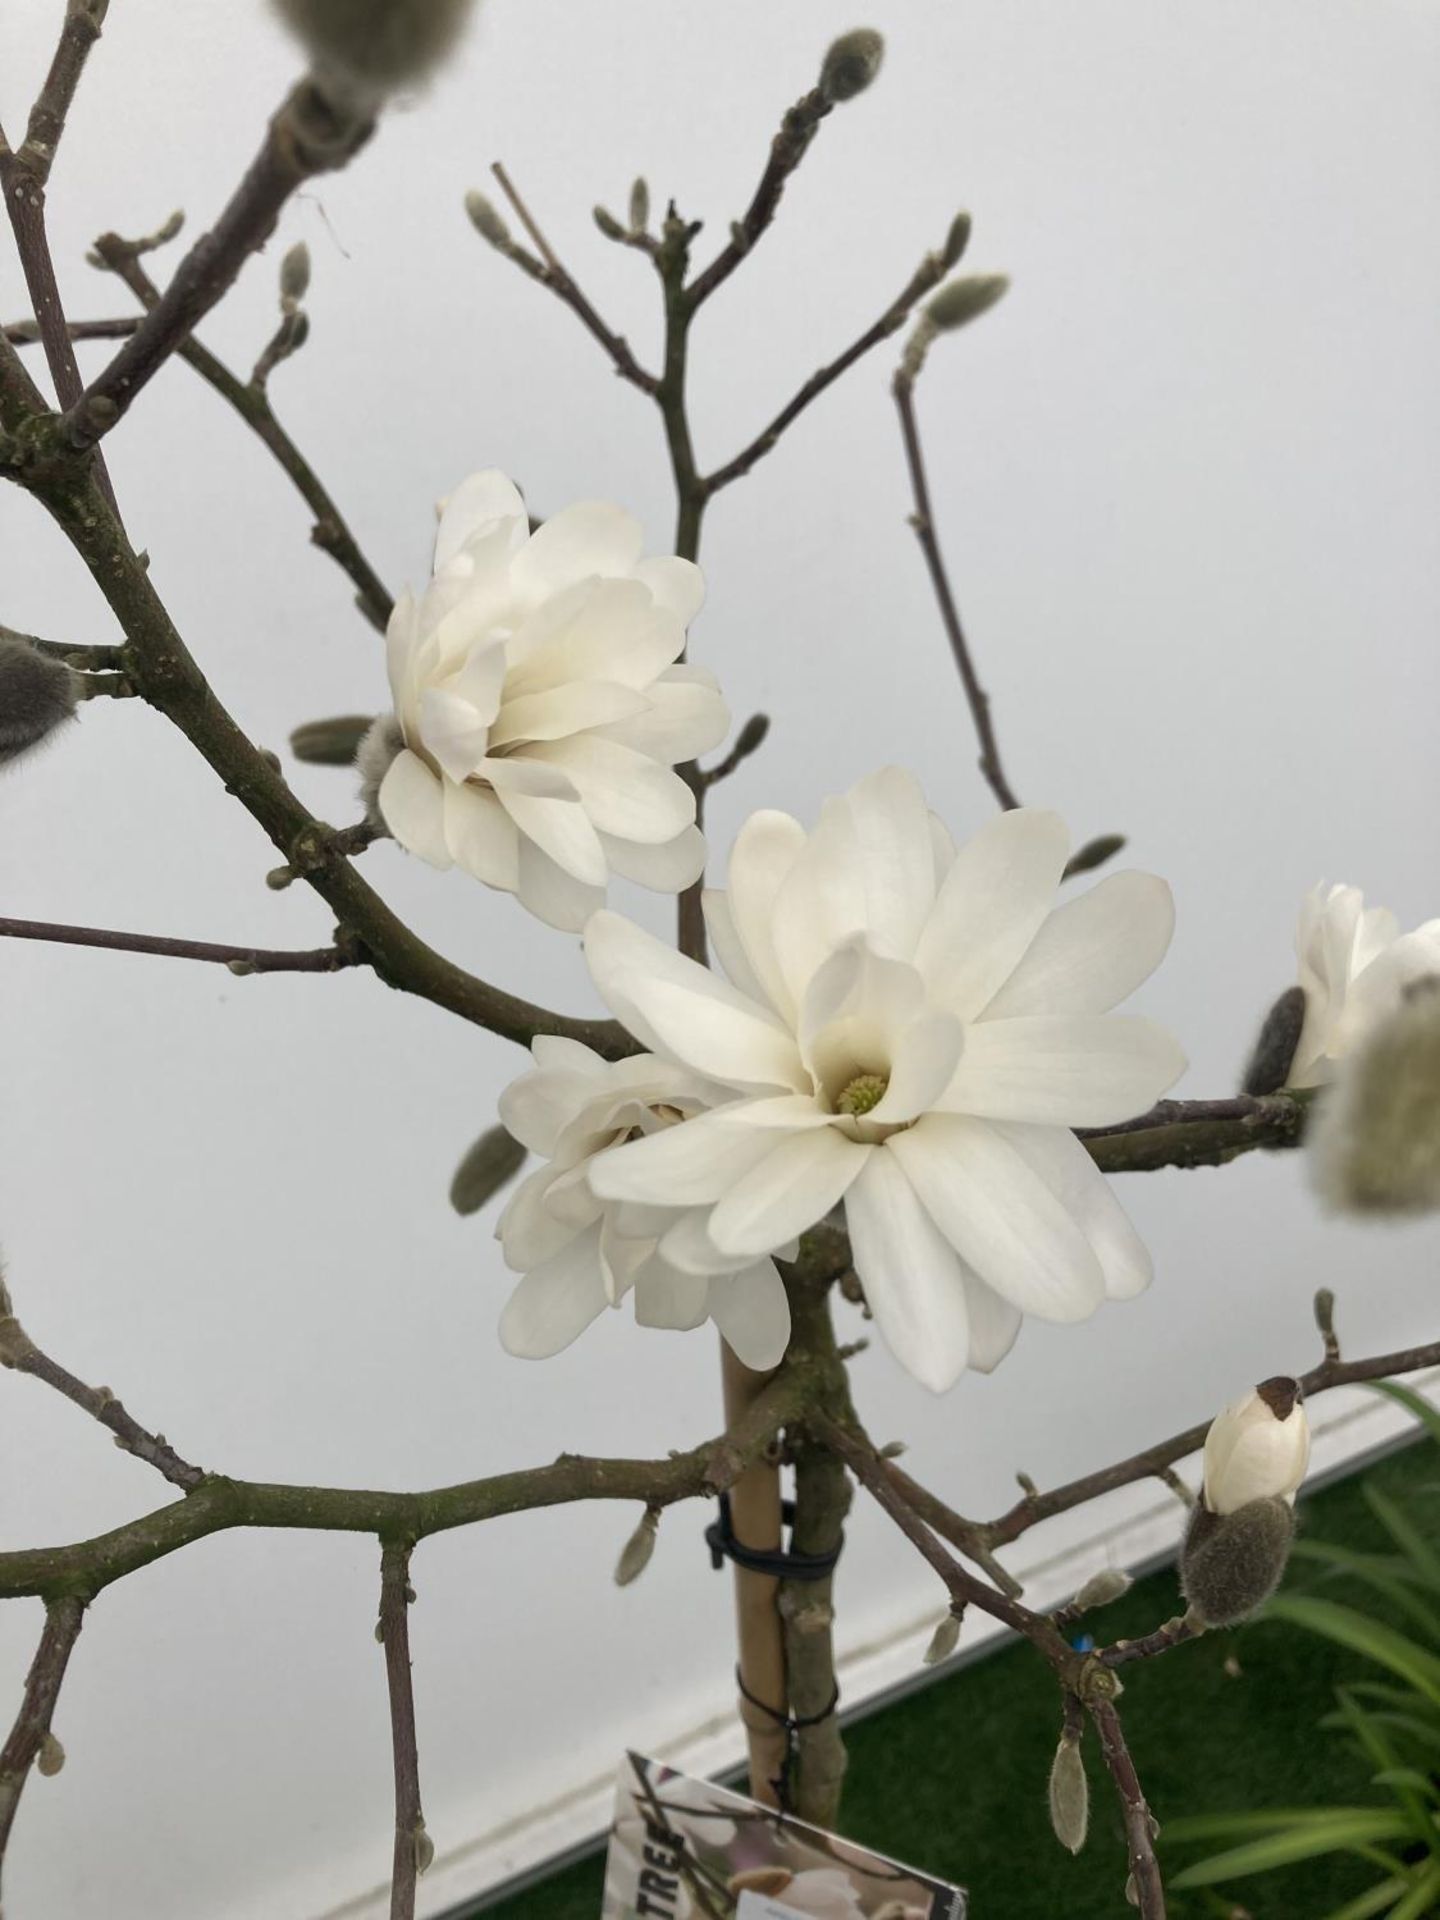 A STANDARD MAGNOLIA STELLATA TREE OVER 160CM TALL IN A 10 LTR POT PLUS VAT - Image 3 of 5